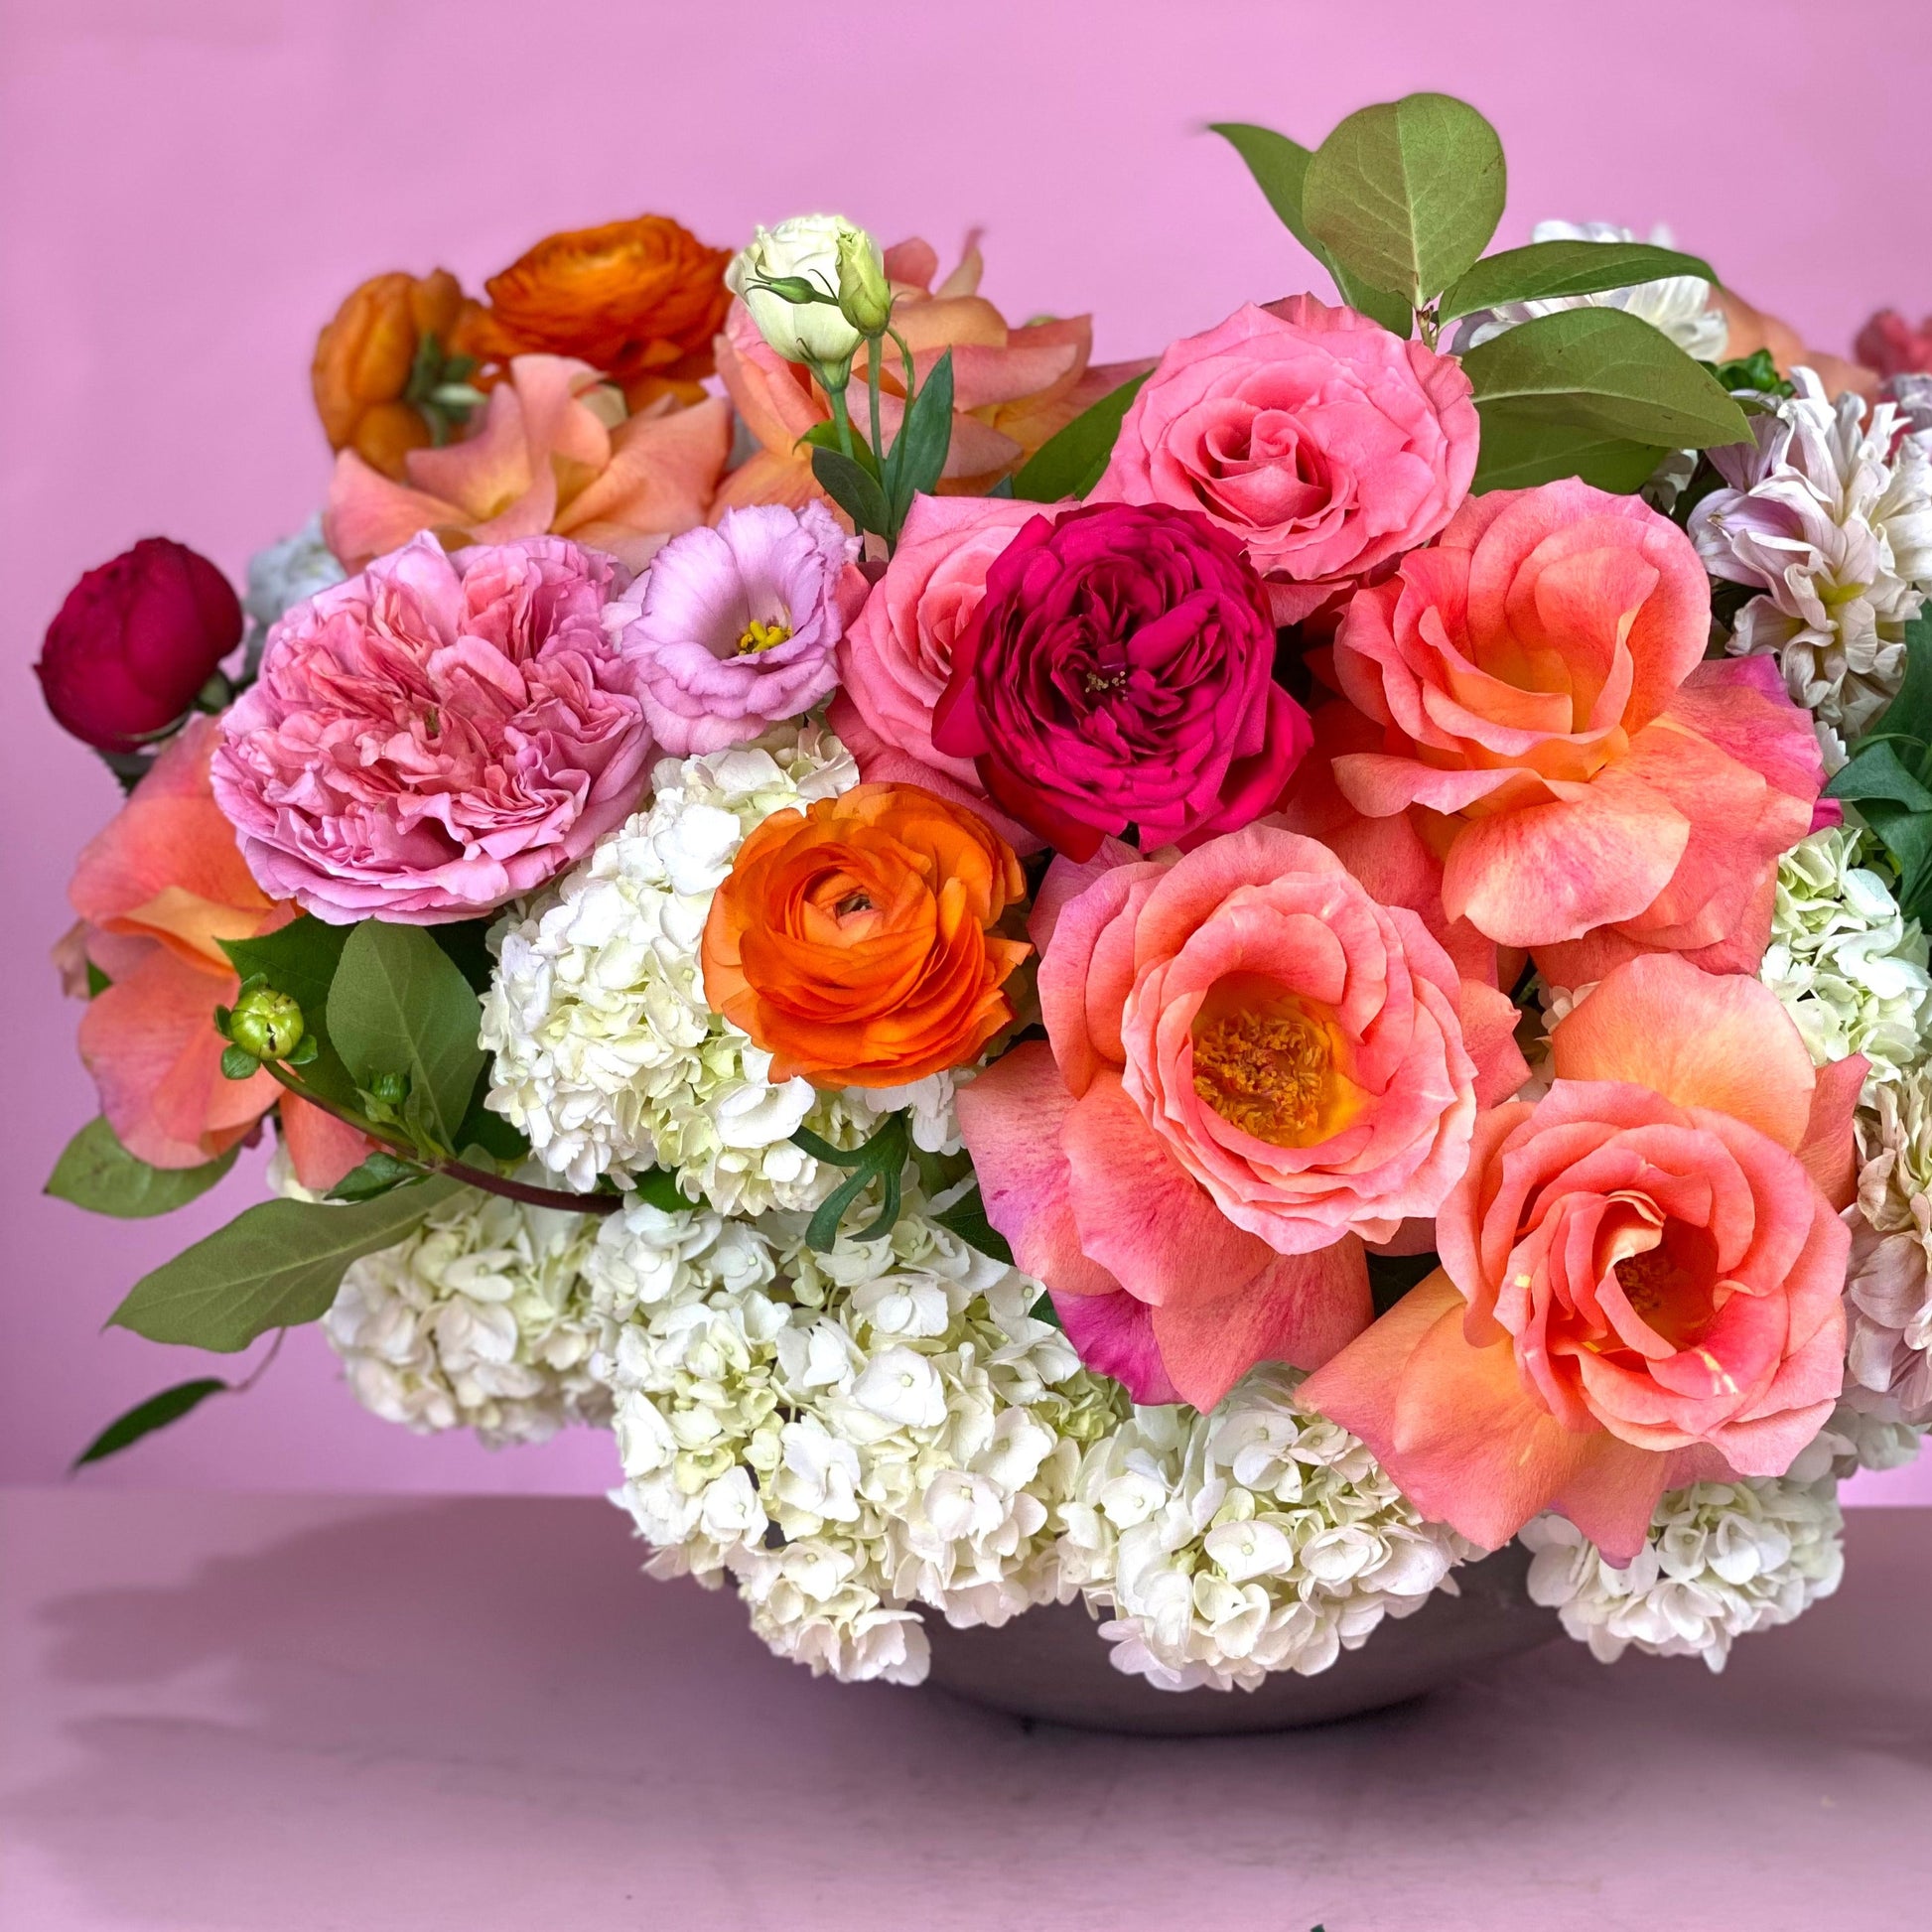 Buy mother's day flowers